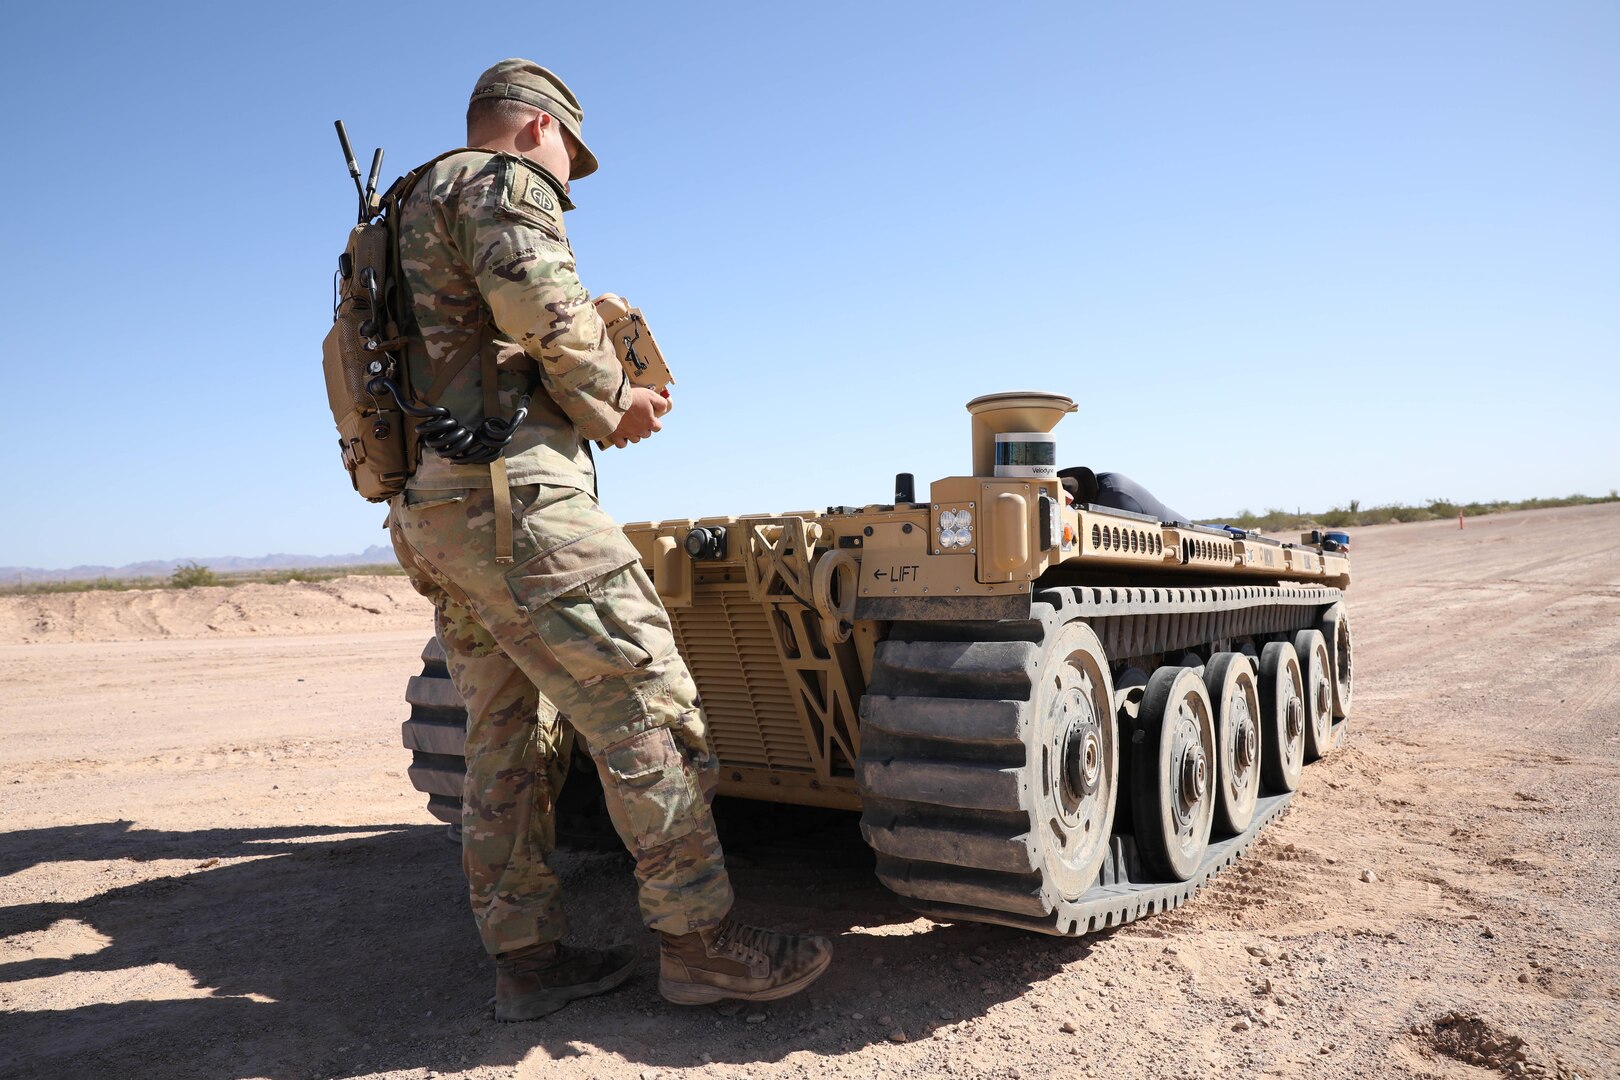 A soldier operates an unmanned ground vehicle.